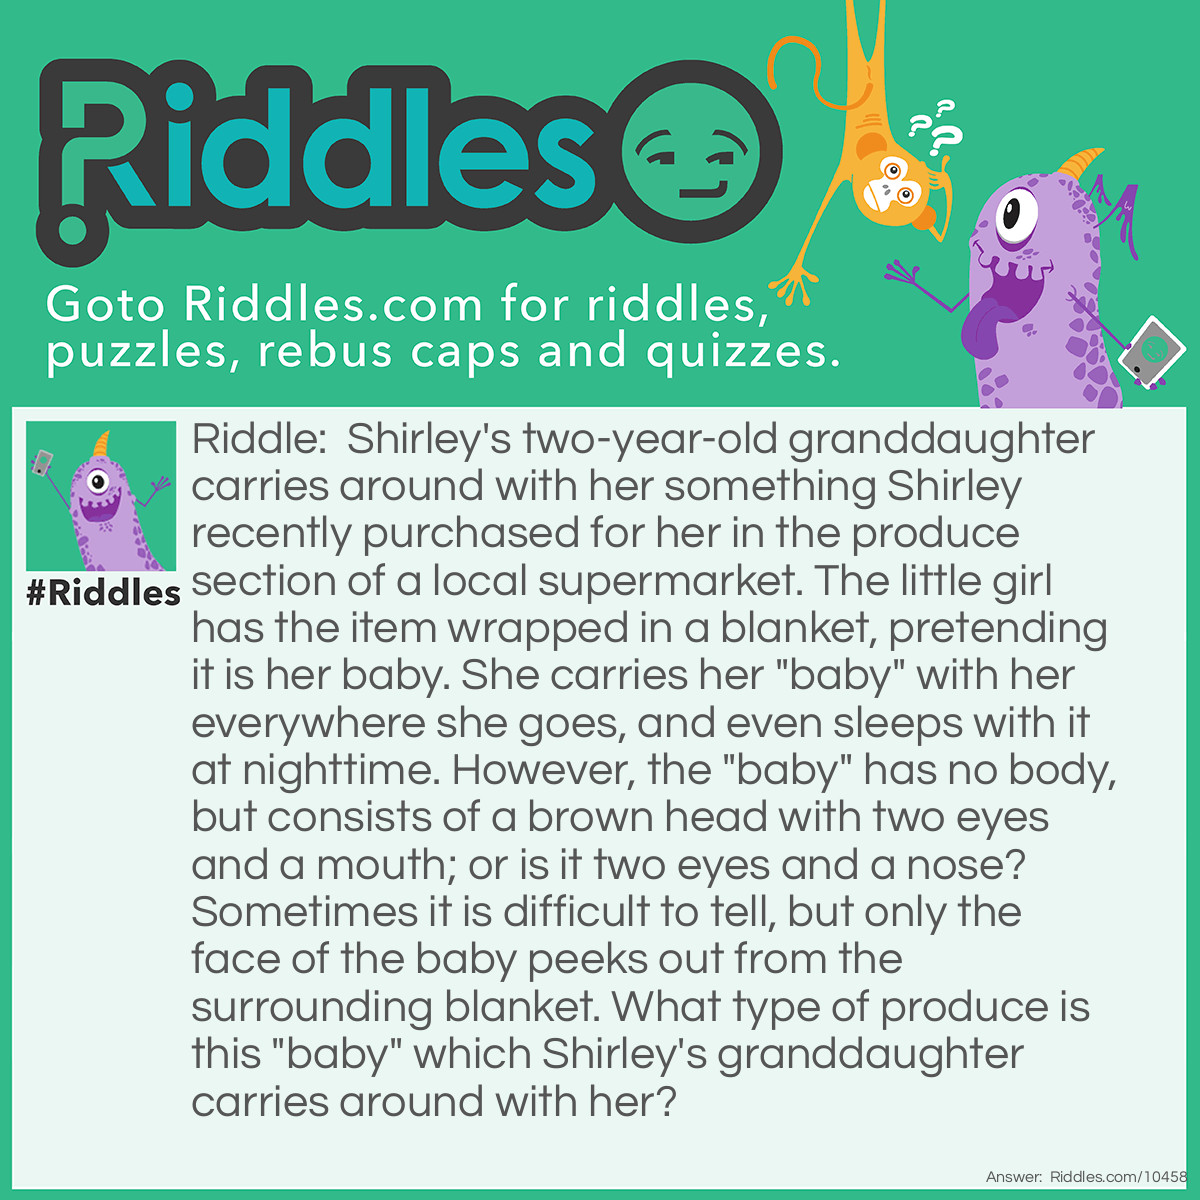 Riddle: Shirley's two-year-old granddaughter carries around with her something Shirley recently purchased for her in the produce section of a local supermarket. The little girl has the item wrapped in a blanket, pretending it is her baby. She carries her "baby" with her everywhere she goes, and even sleeps with it at nighttime. However, the "baby" has no body, but consists of a brown head with two eyes and a mouth; or is it two eyes and a nose? Sometimes it is difficult to tell, but only the face of the baby peeks out from the surrounding blanket. What type of produce is this "baby" which Shirley's granddaughter carries around with her? Answer: The two-year-old’s “baby” is actually a coconut which she wraps in a blanket, with the three circular indentations of the “face” turned outward.